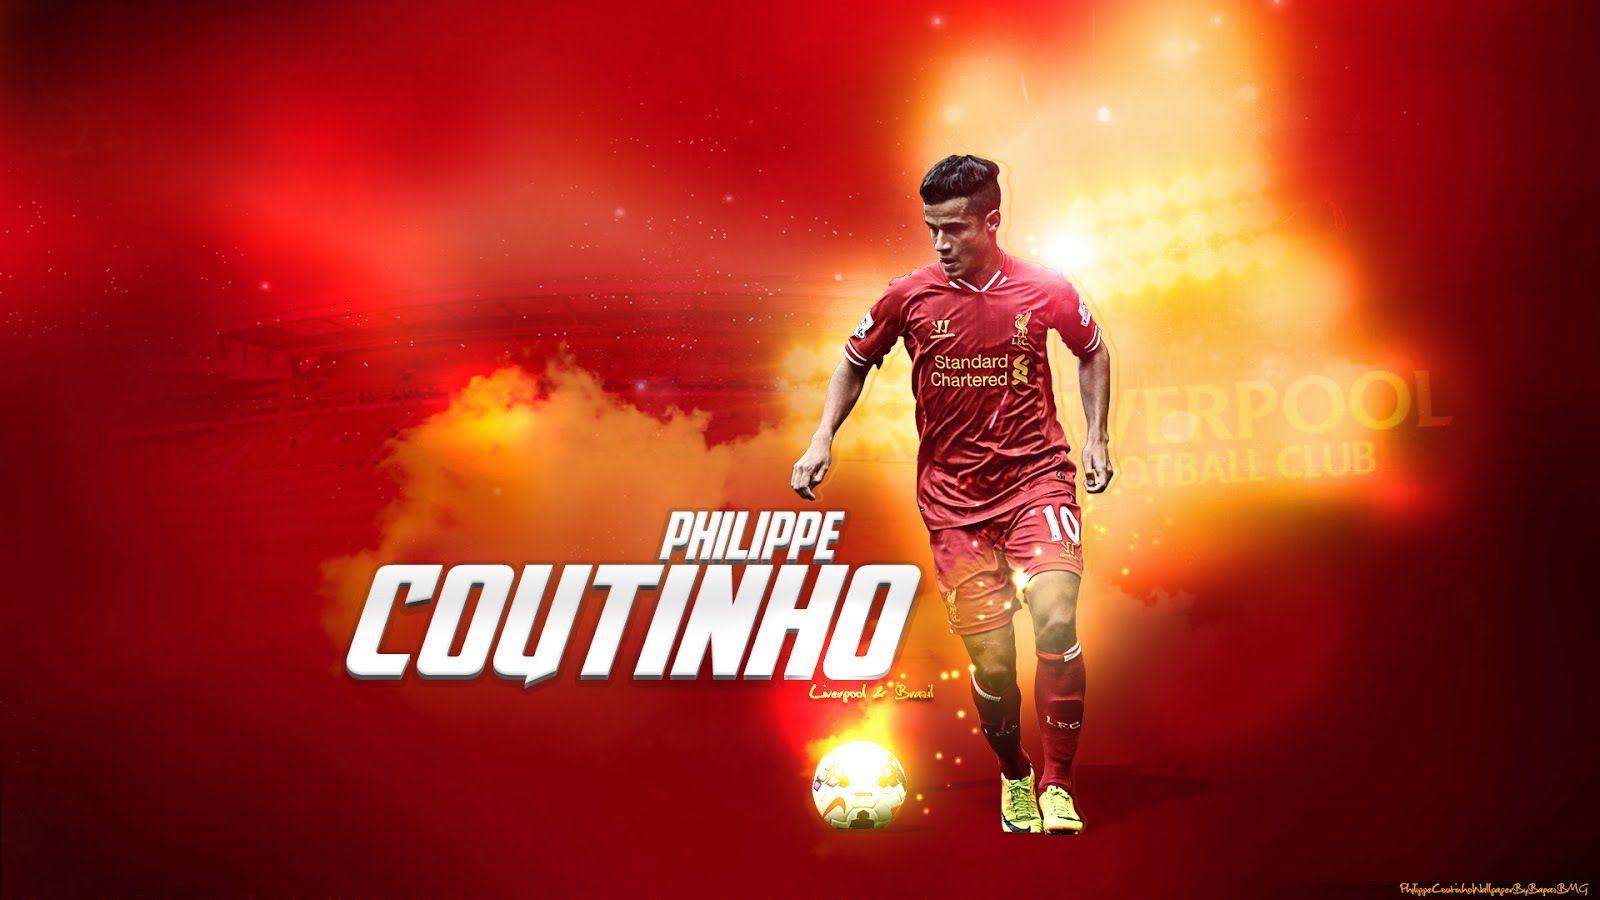 Philippe Coutinho ● Magic King Kong ● All Goals And Skills Show